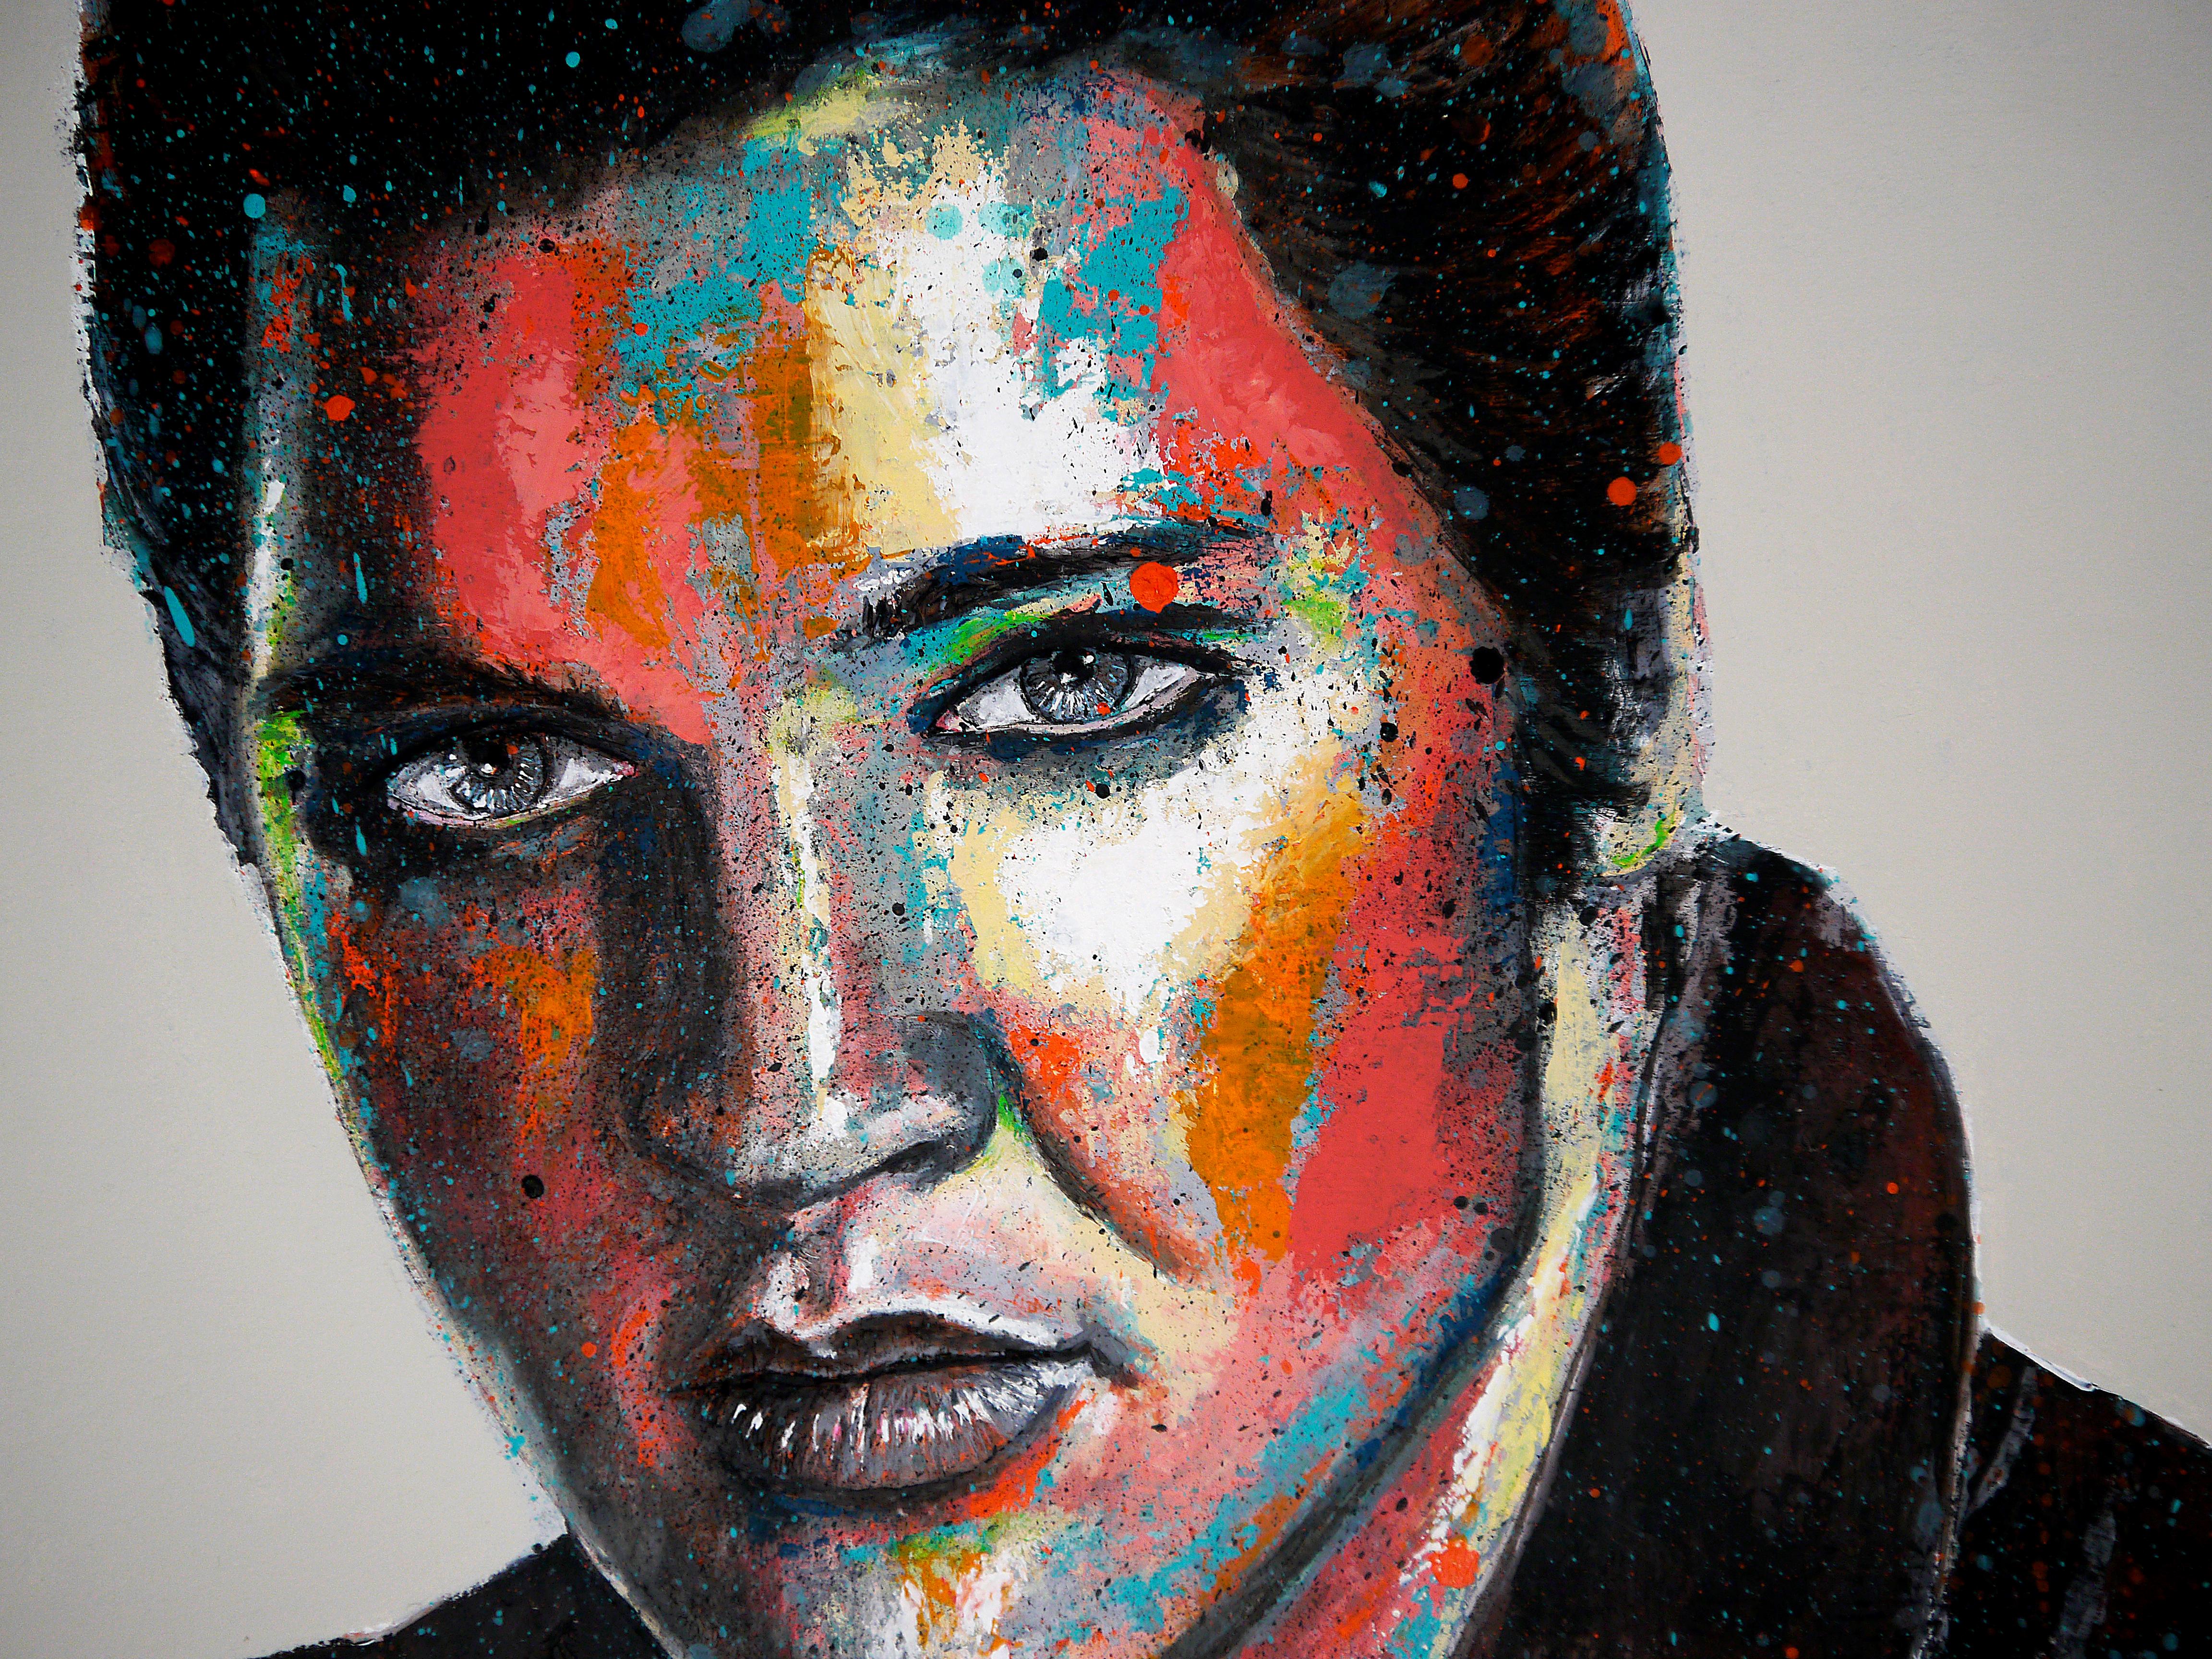 Portrait Elvis Presley

Technique: Acrylics, oil painting, China ink on canvas 73x60cm / 28,7x23,6inch

》》R E A D Y -- T O -- H A N G《《


❶ → Original signed work. Certificate of authenticity included.

❷ → Protection for shipping (plywood, foam,